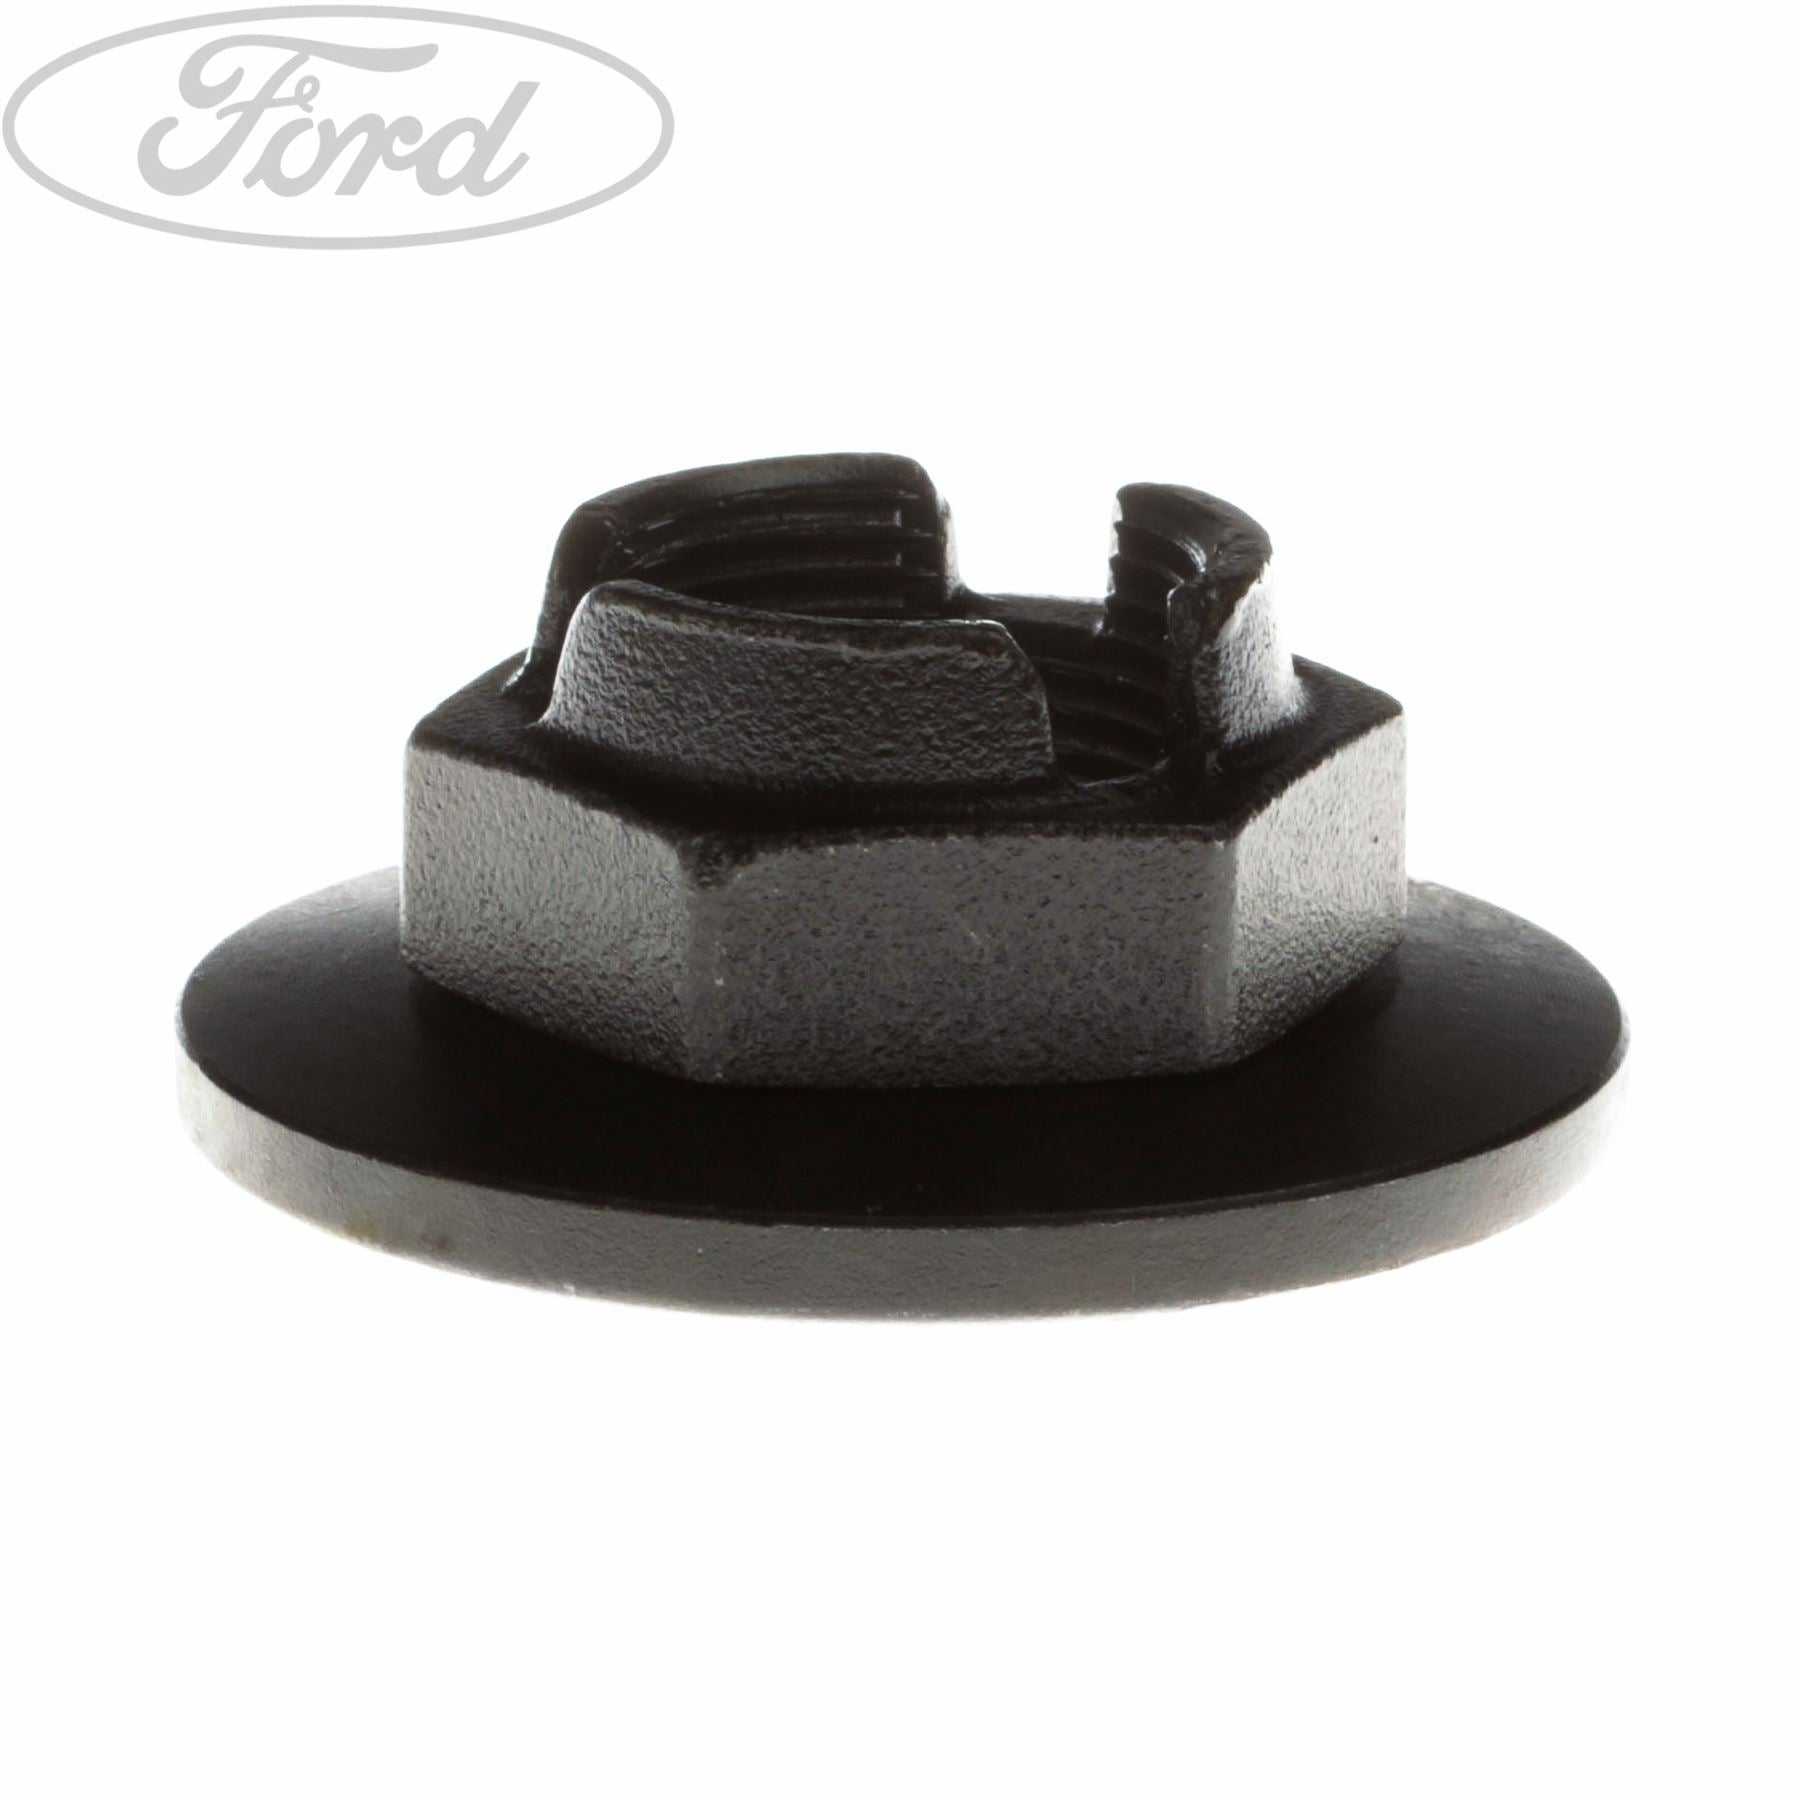 Ford, TRANSIT CONNECT REAR KNUCKLE SPINDLE HUB NUT 2002-2013